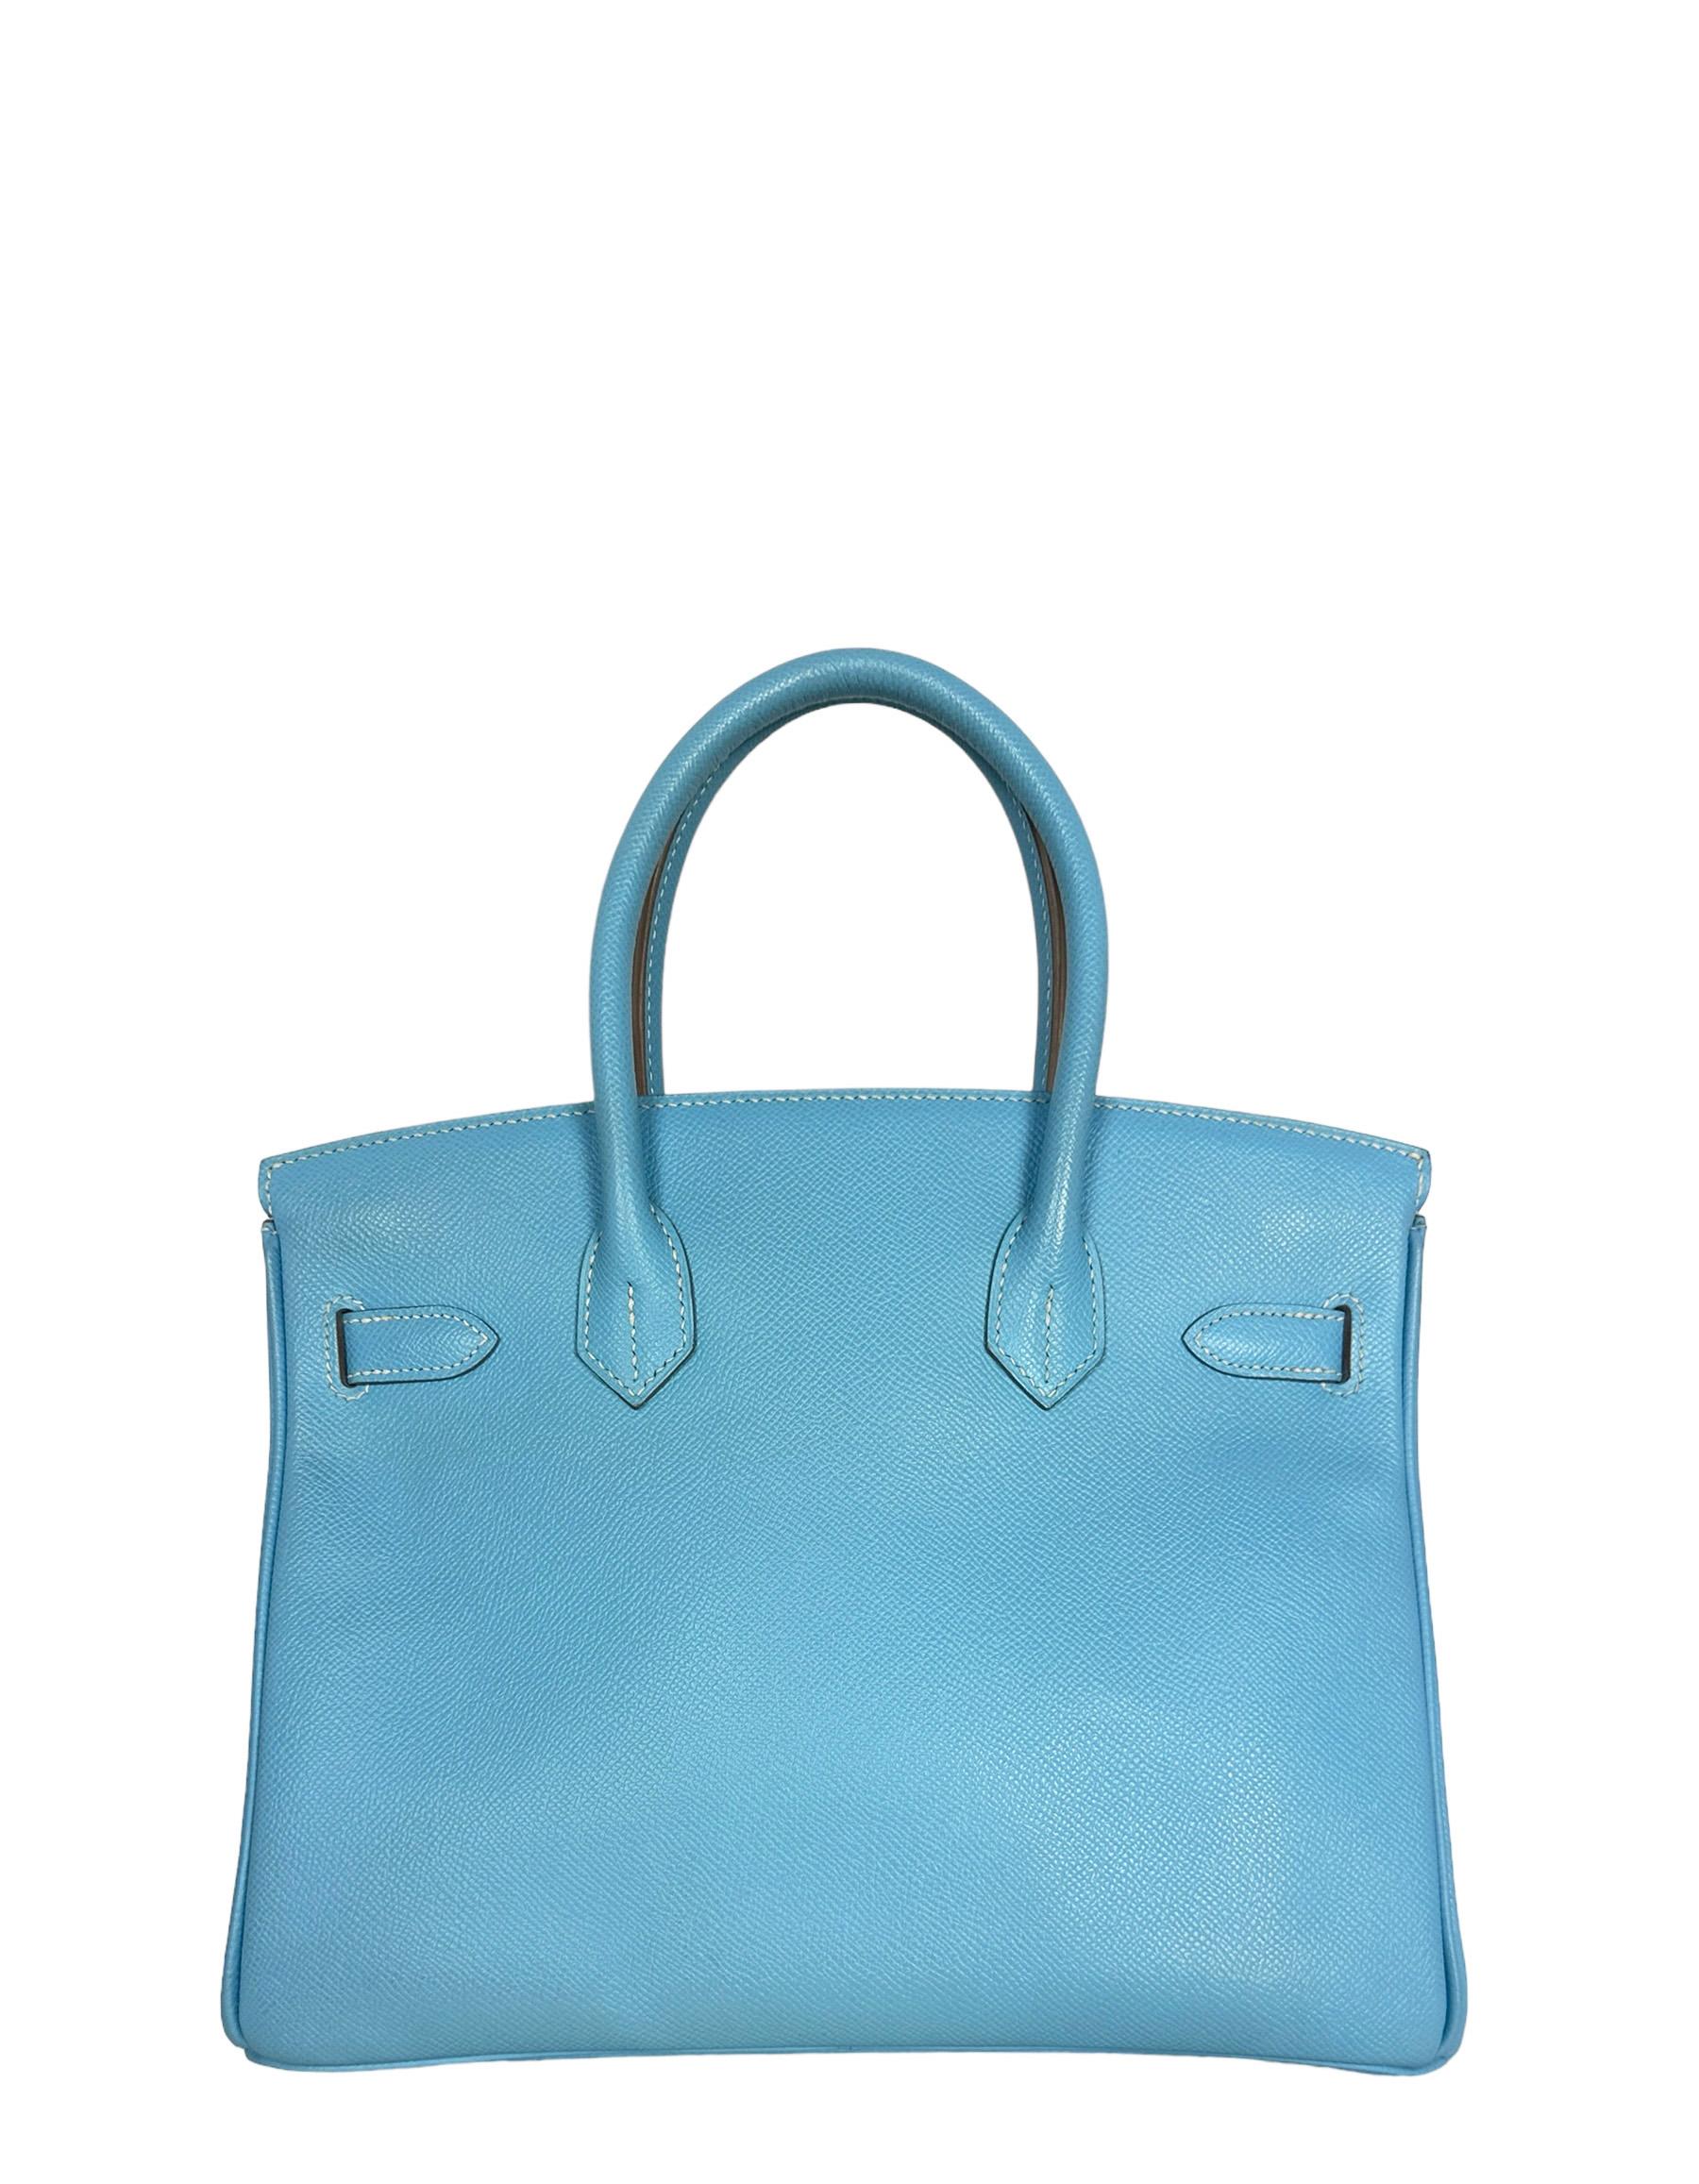 Hermes Blue Celeste/ Mykonos Epsom Leather 30cm Candy Birkin Bag PHW In Excellent Condition For Sale In New York, NY